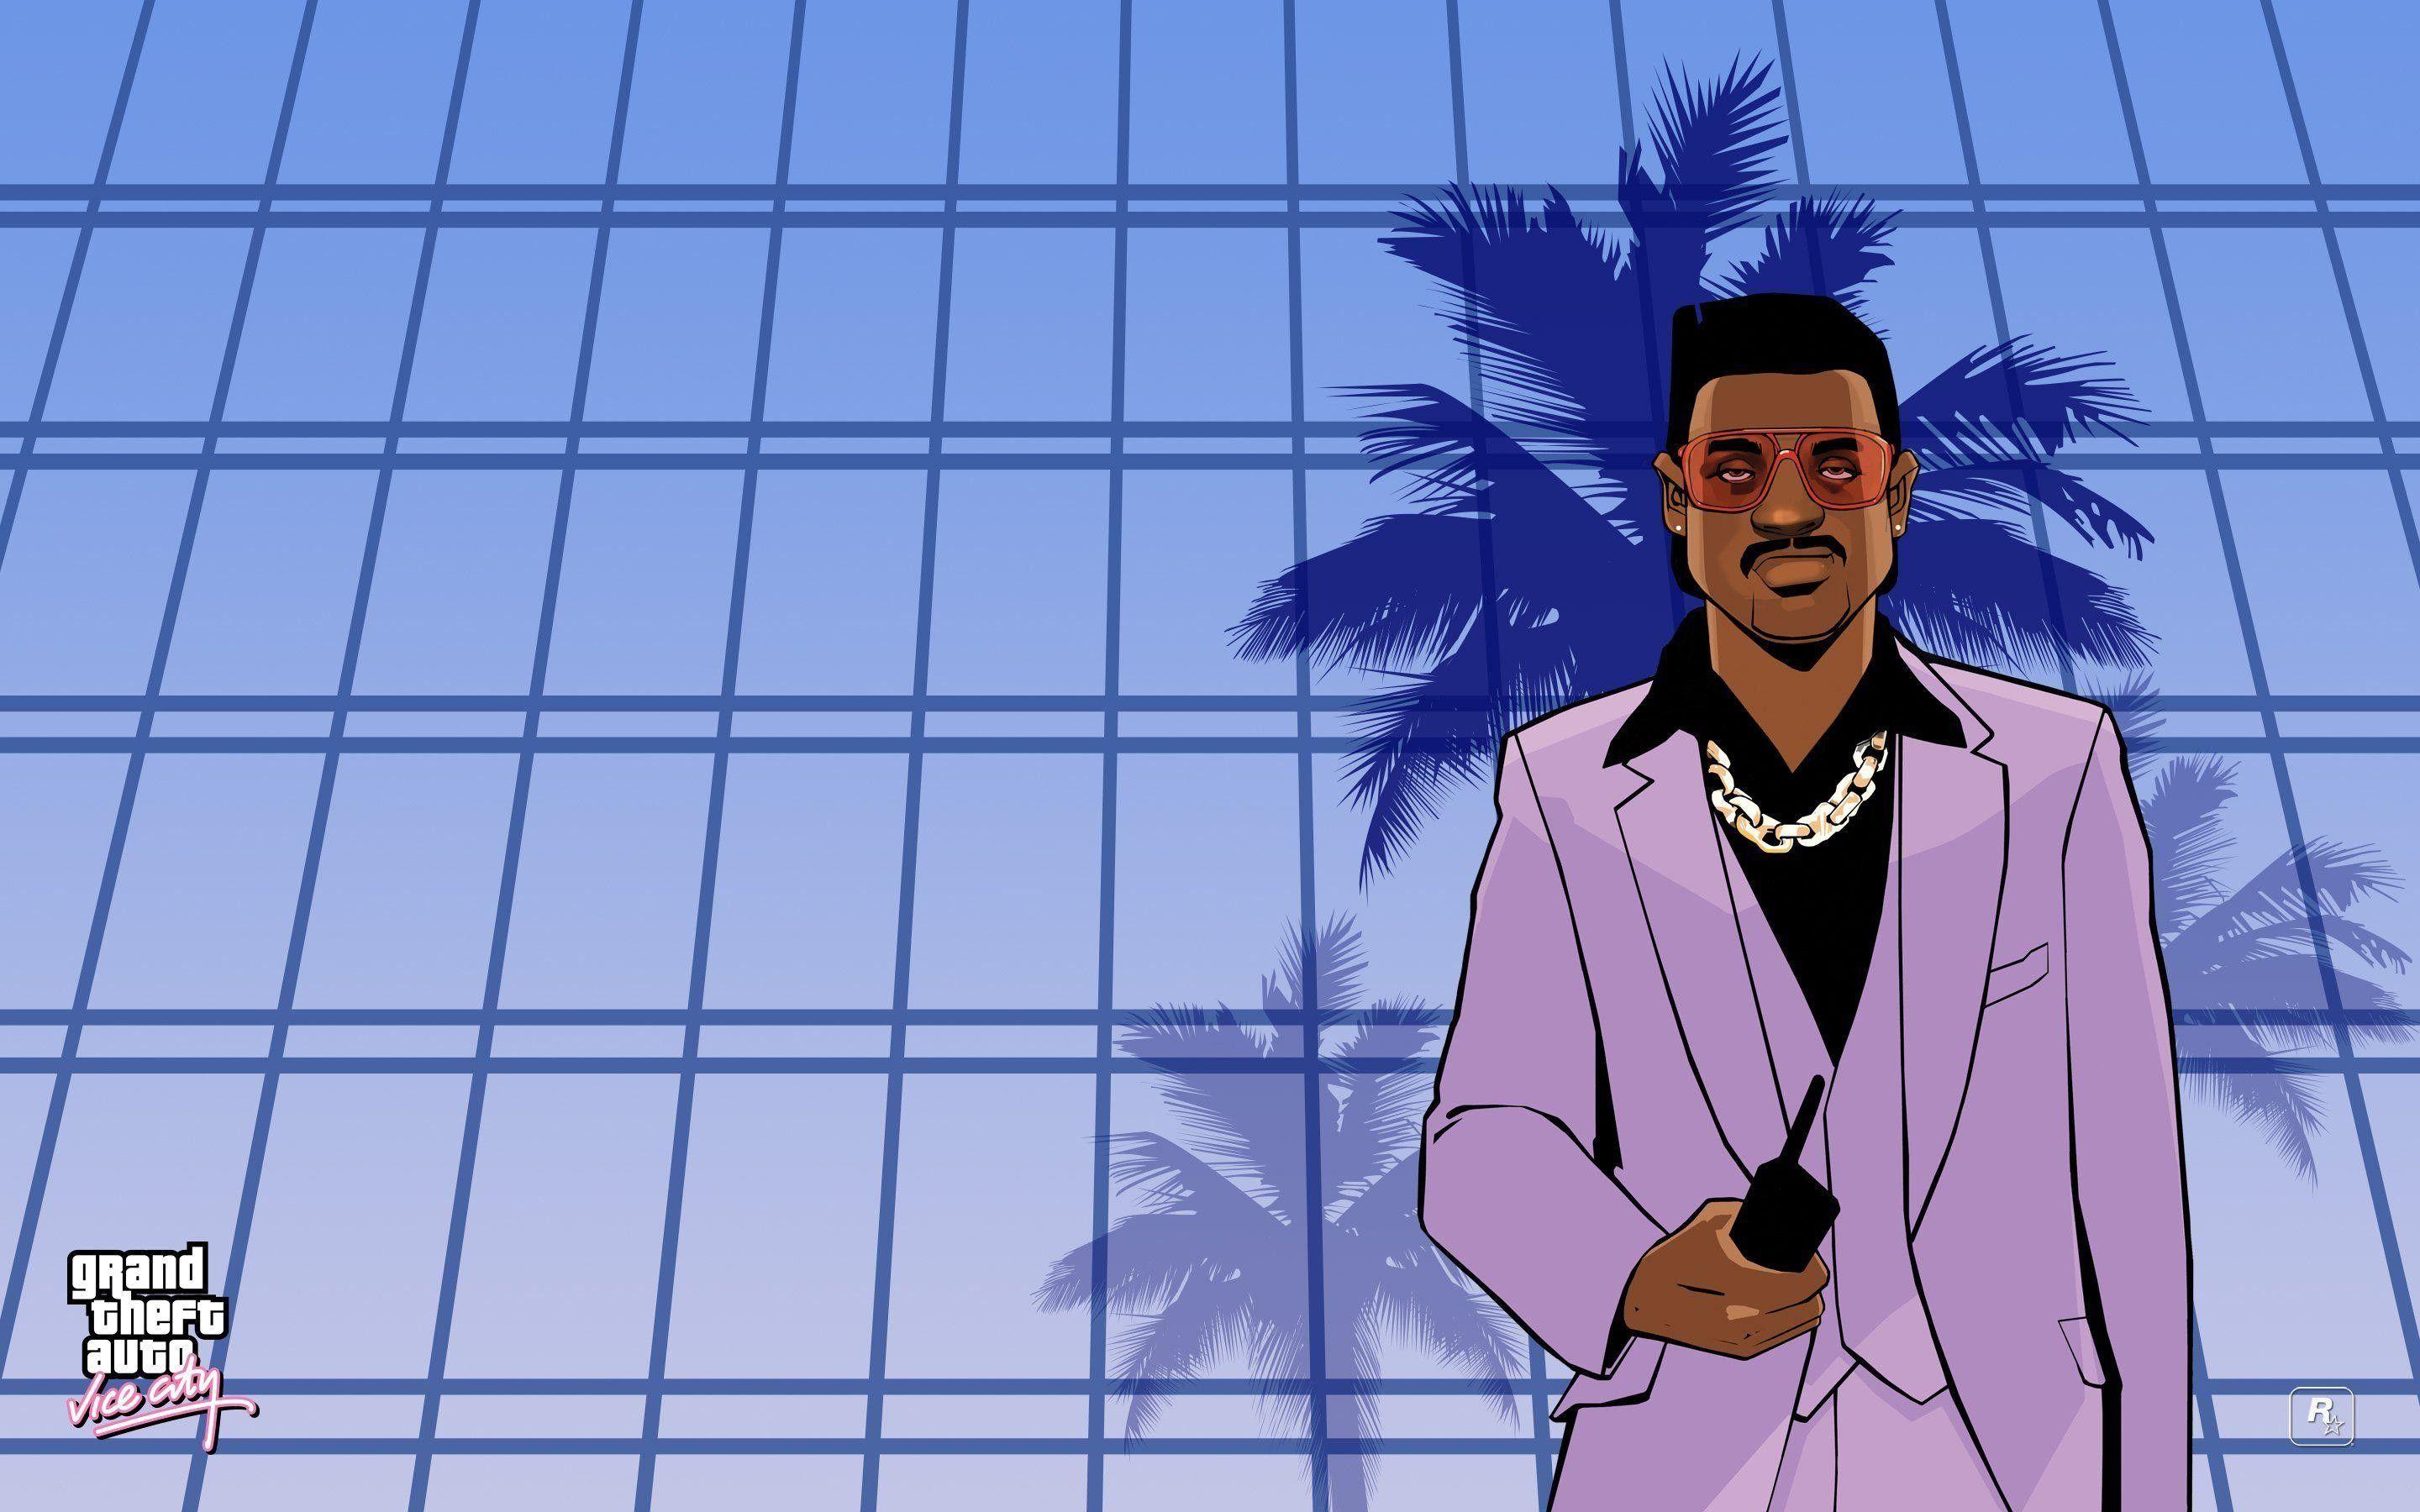 Gta Vice City Wallpapers - Top Free Gta Vice City Backgrounds